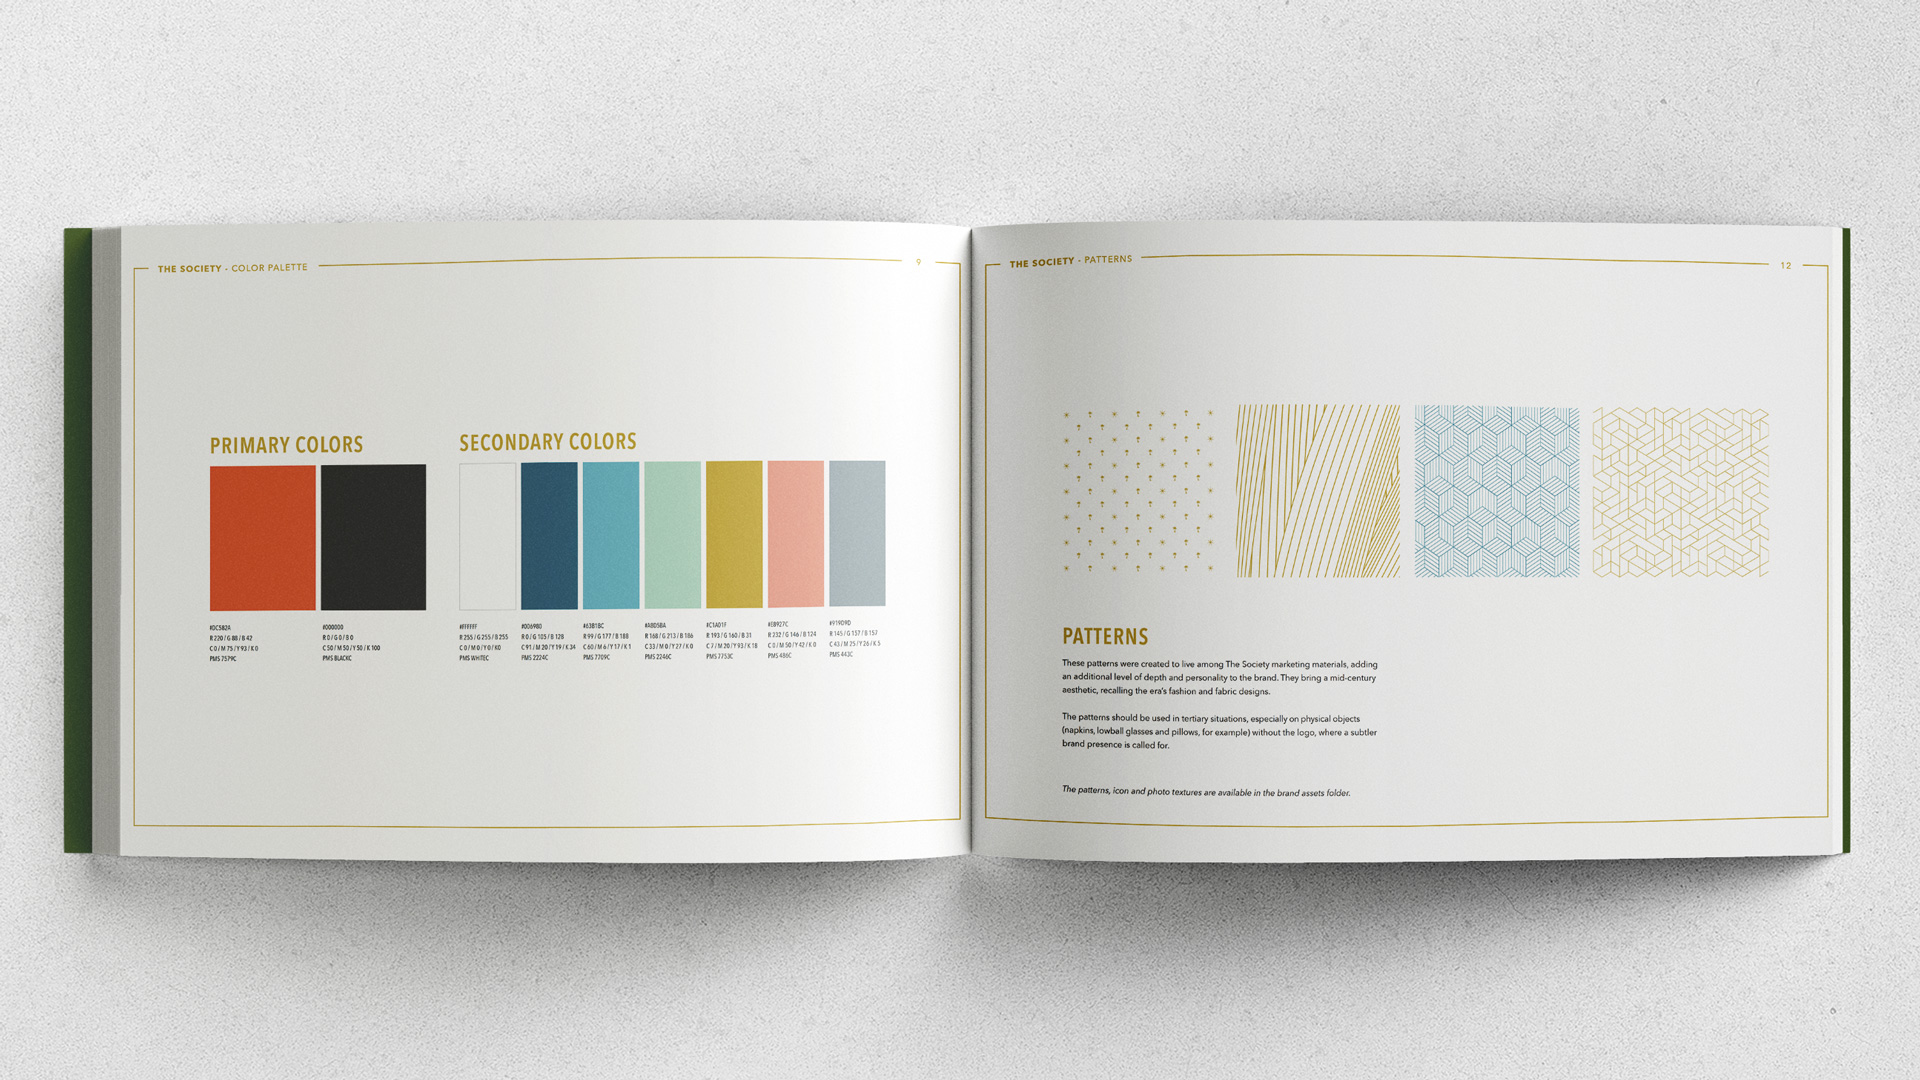 The Society apartments branding brand book showing color created by Incubate Design for Holland Residential